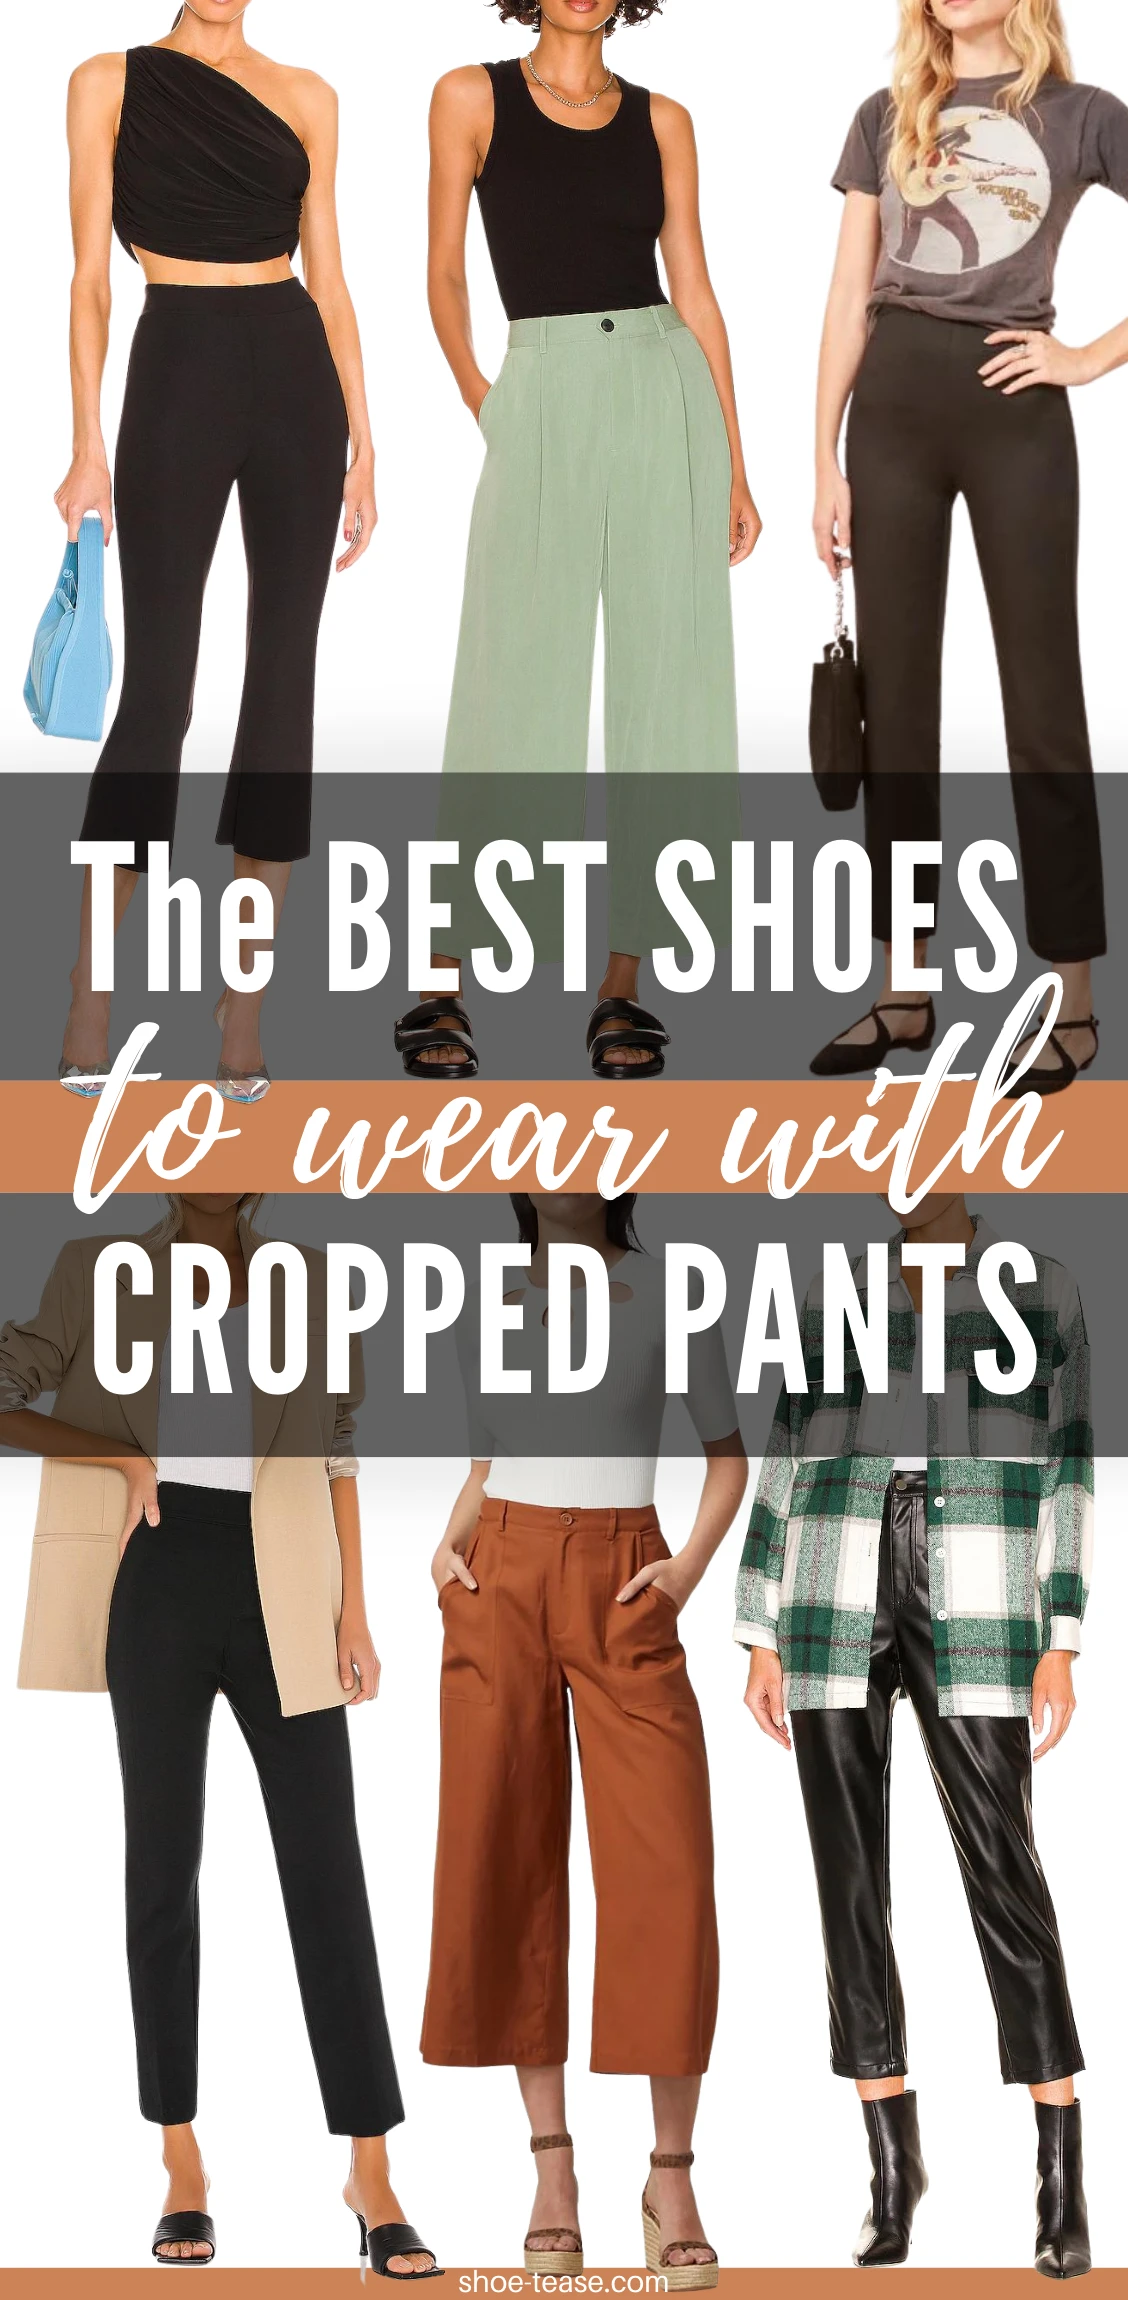 15 Best Shoes to Wear with Cropped Dress Pants & Capris for Women